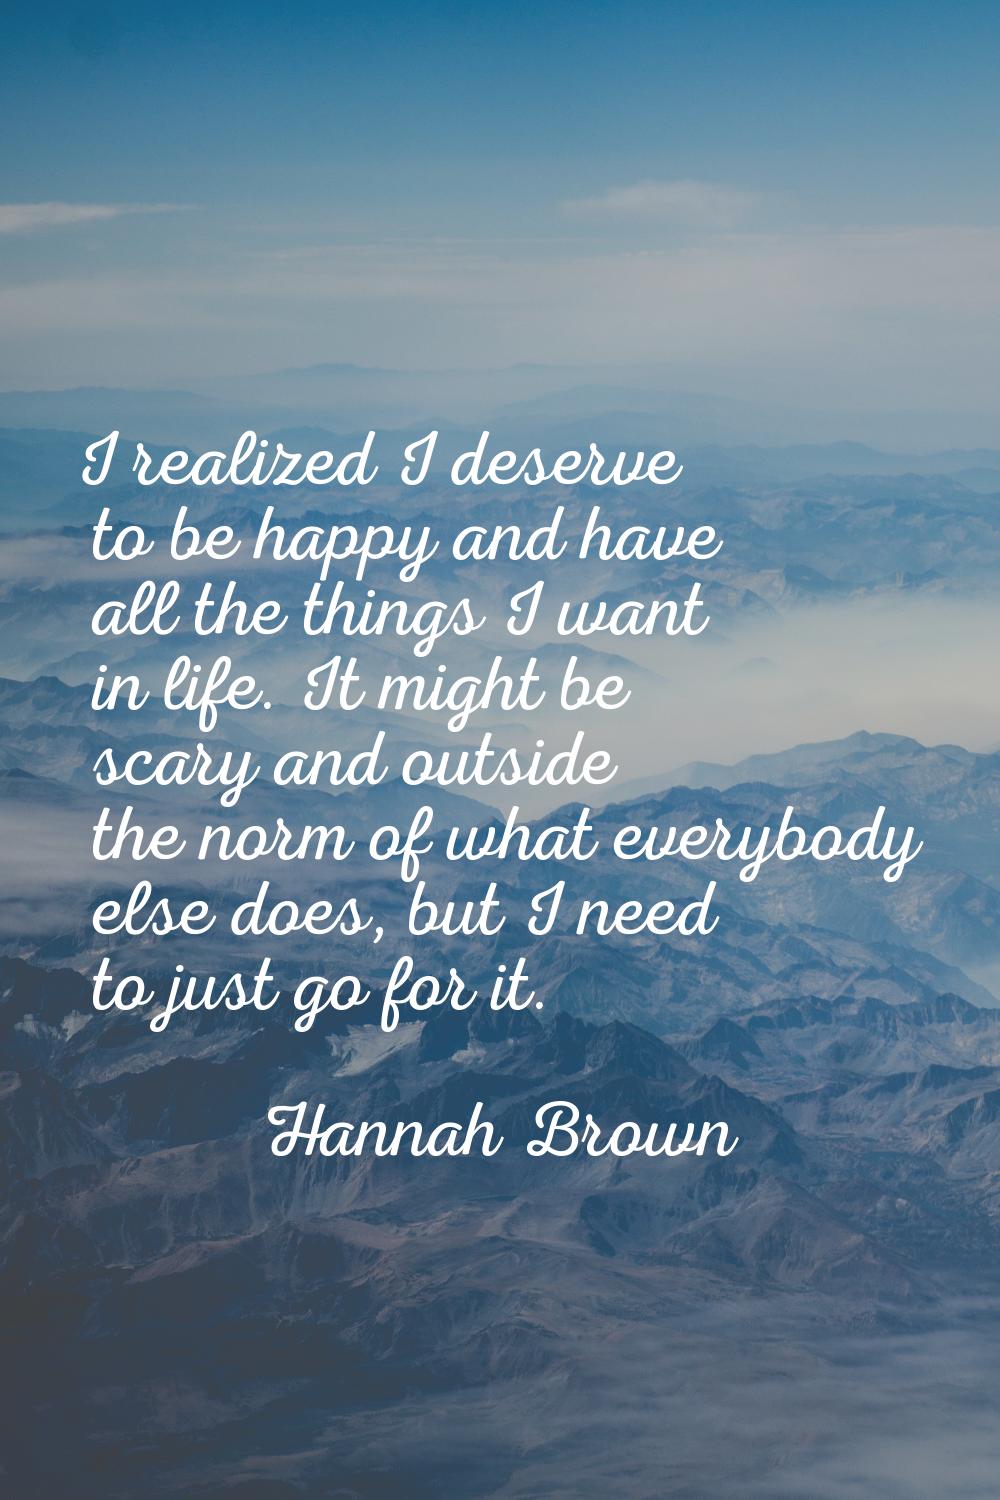 I realized I deserve to be happy and have all the things I want in life. It might be scary and outs